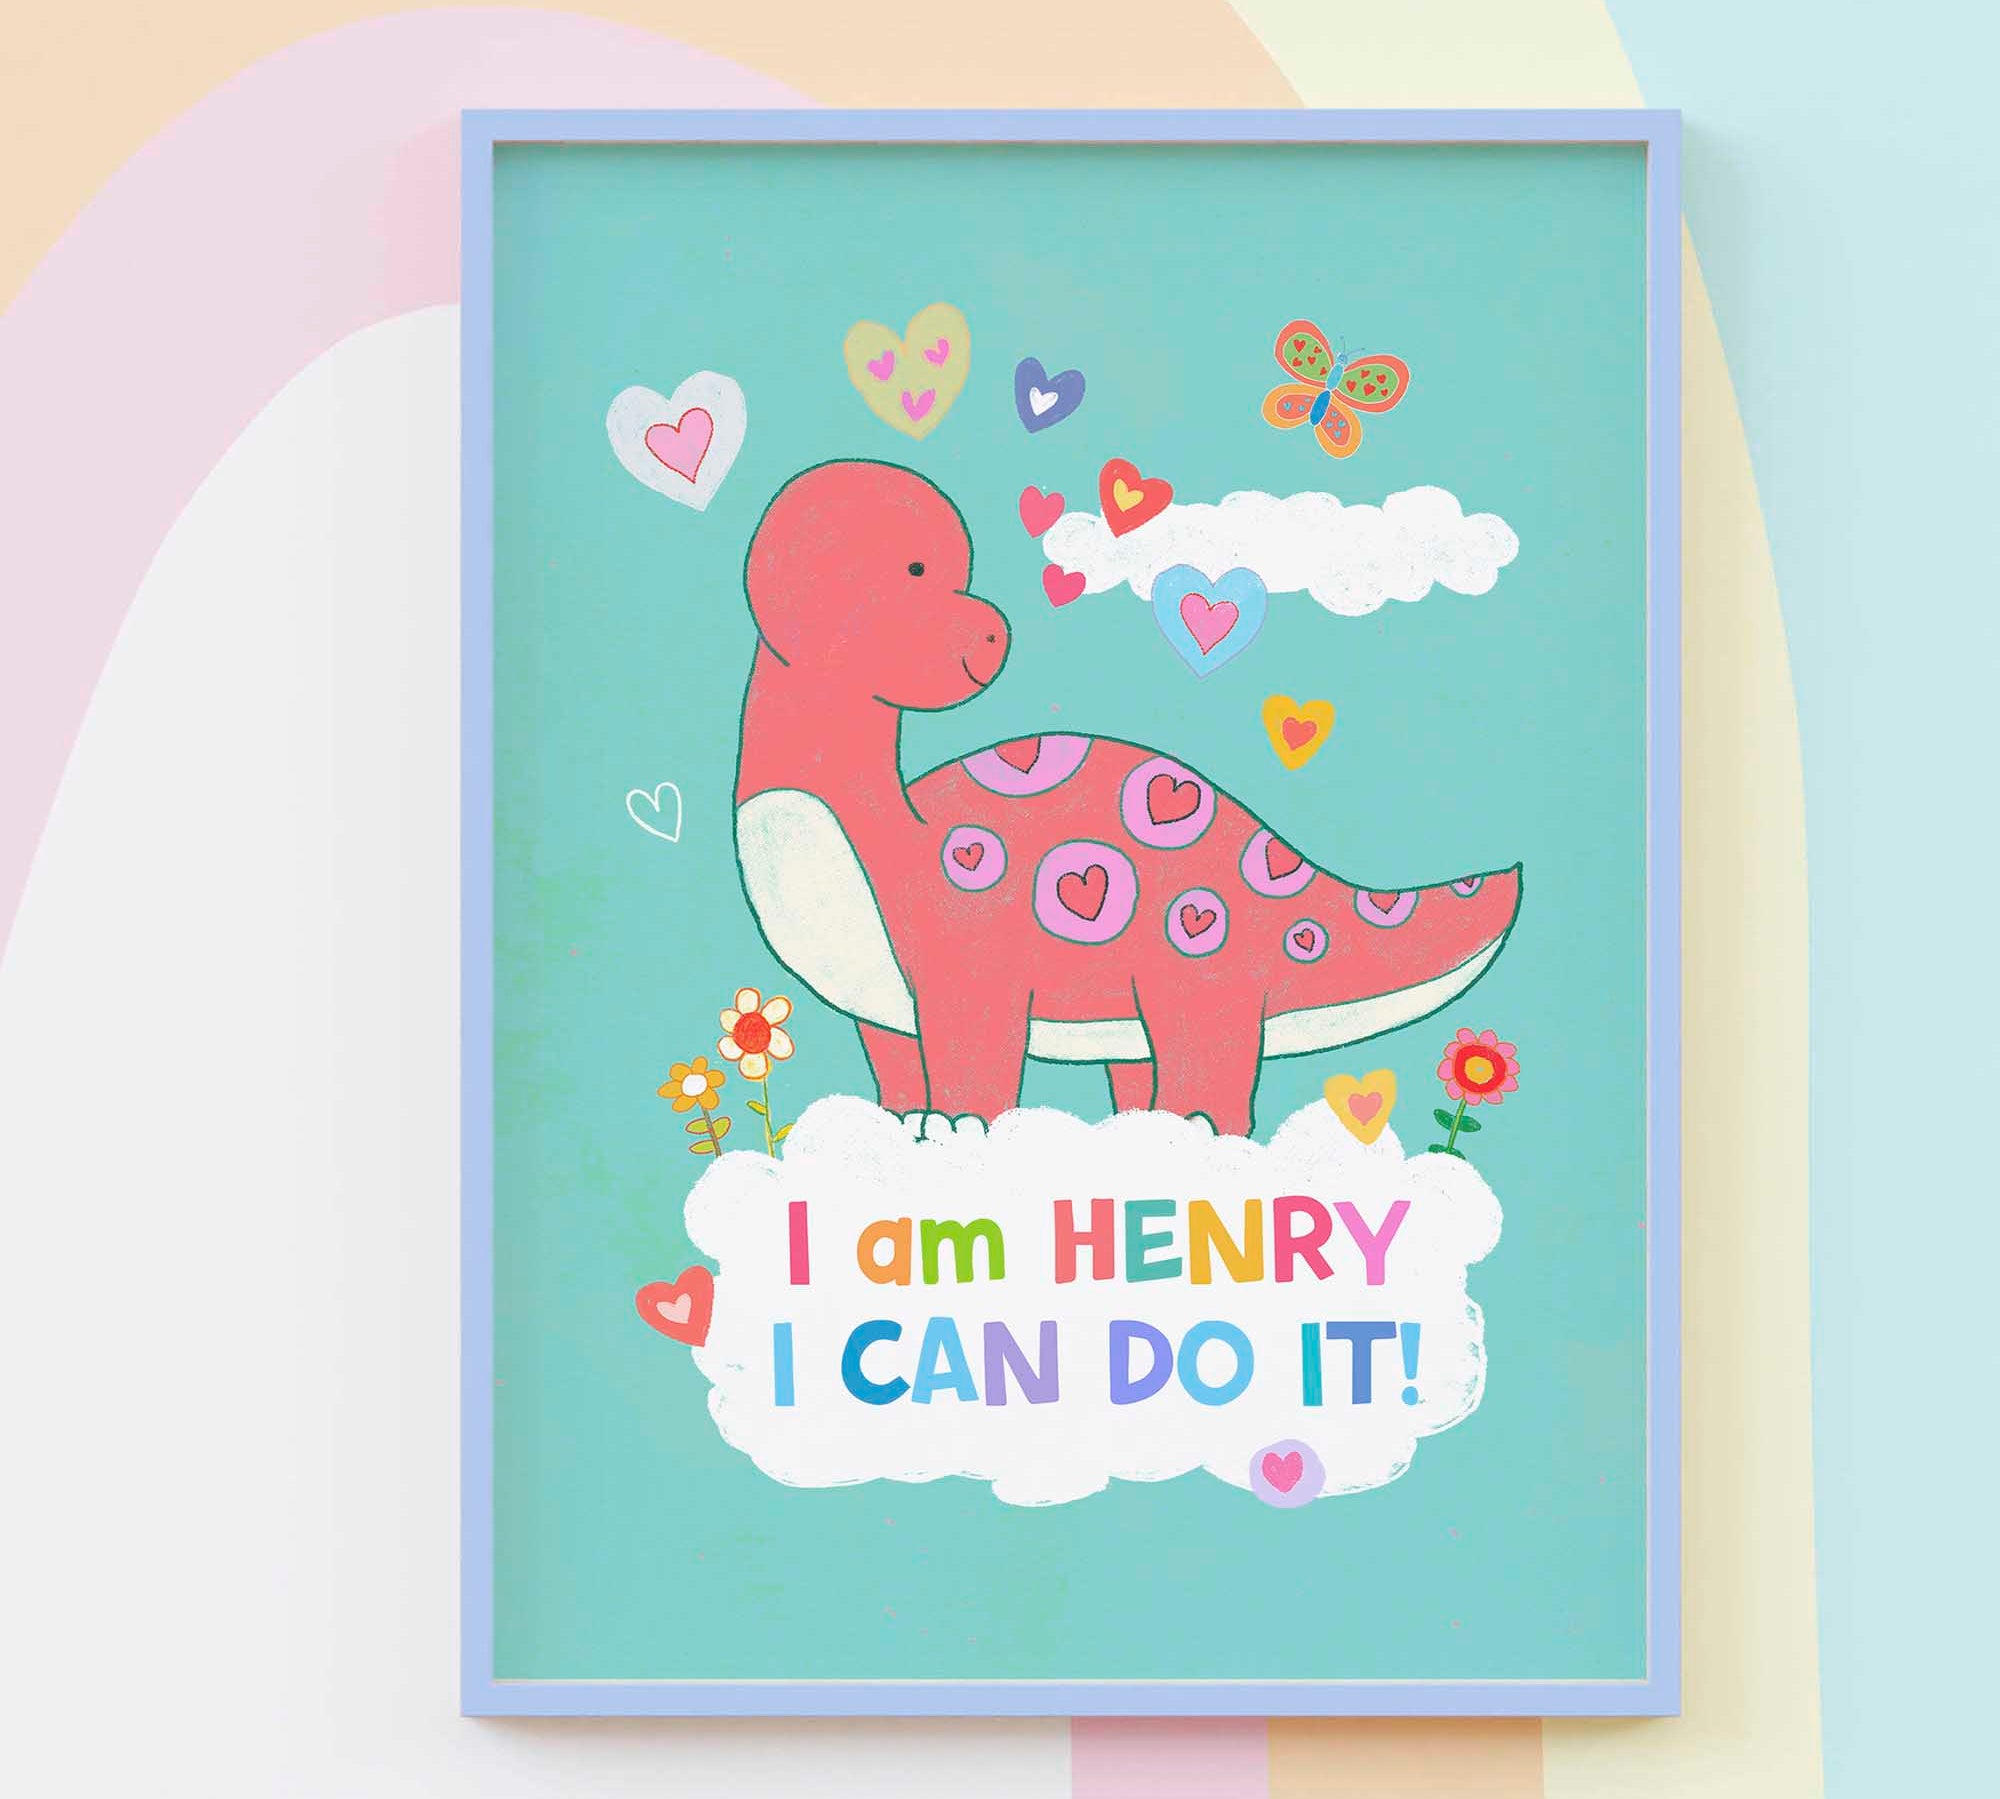 Magical dinosaur wall art for kids with affirmations, perfect for boho nursery decor.